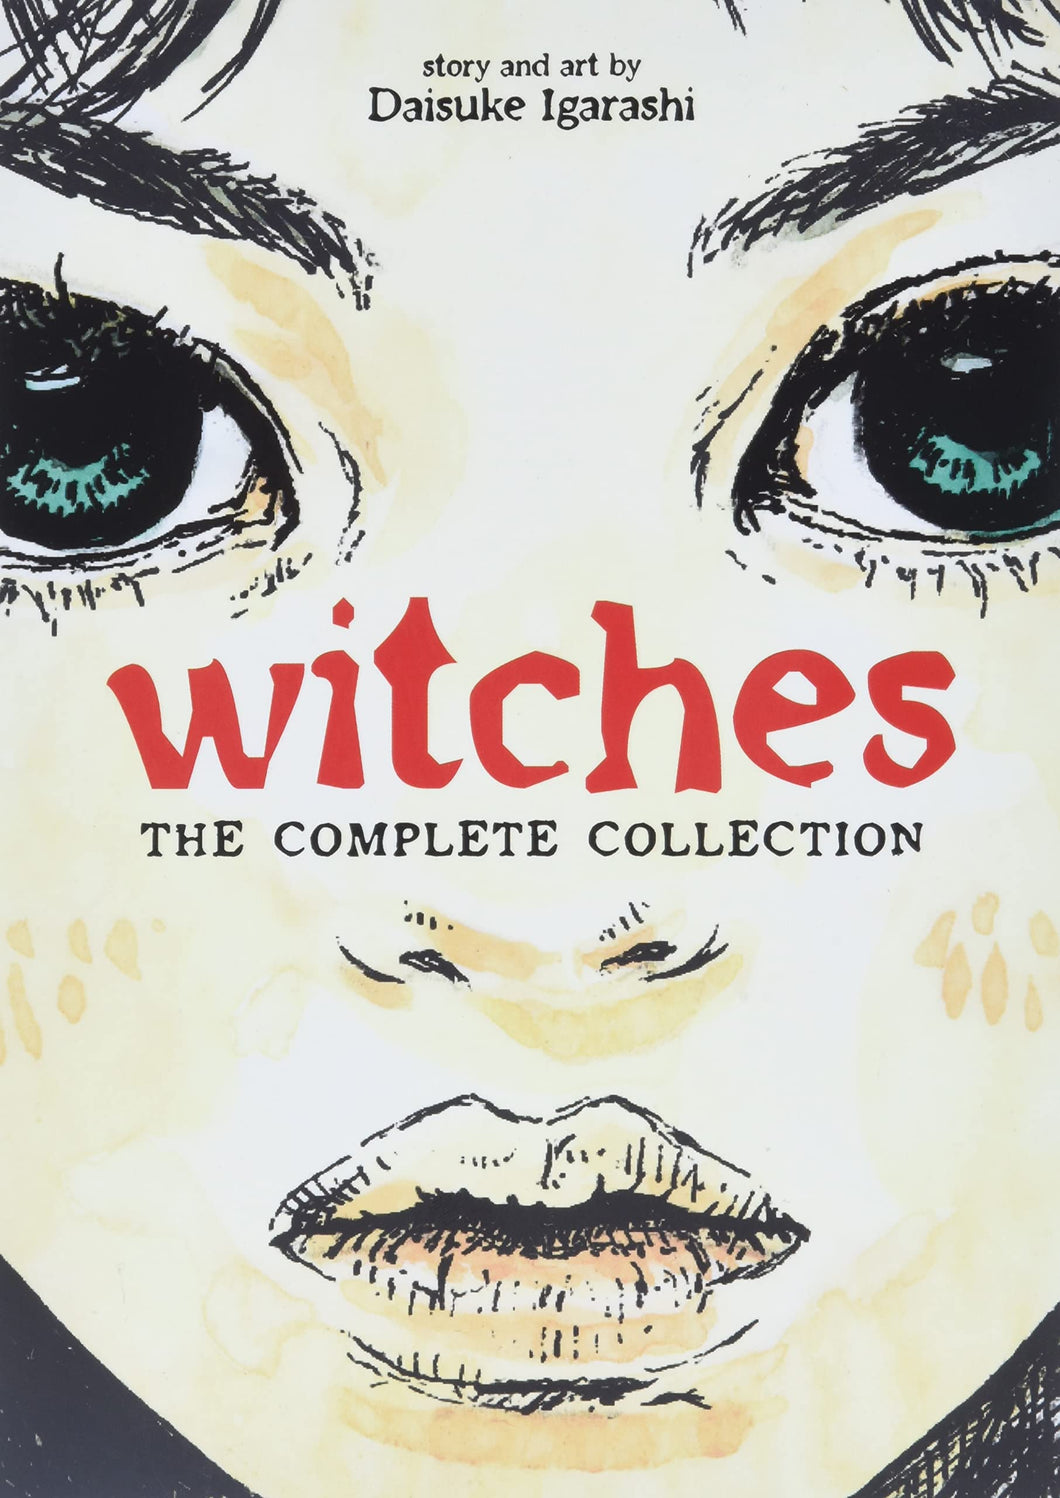 Witches: The Complete Collection (Omnibus) by Daisuke Igarashi